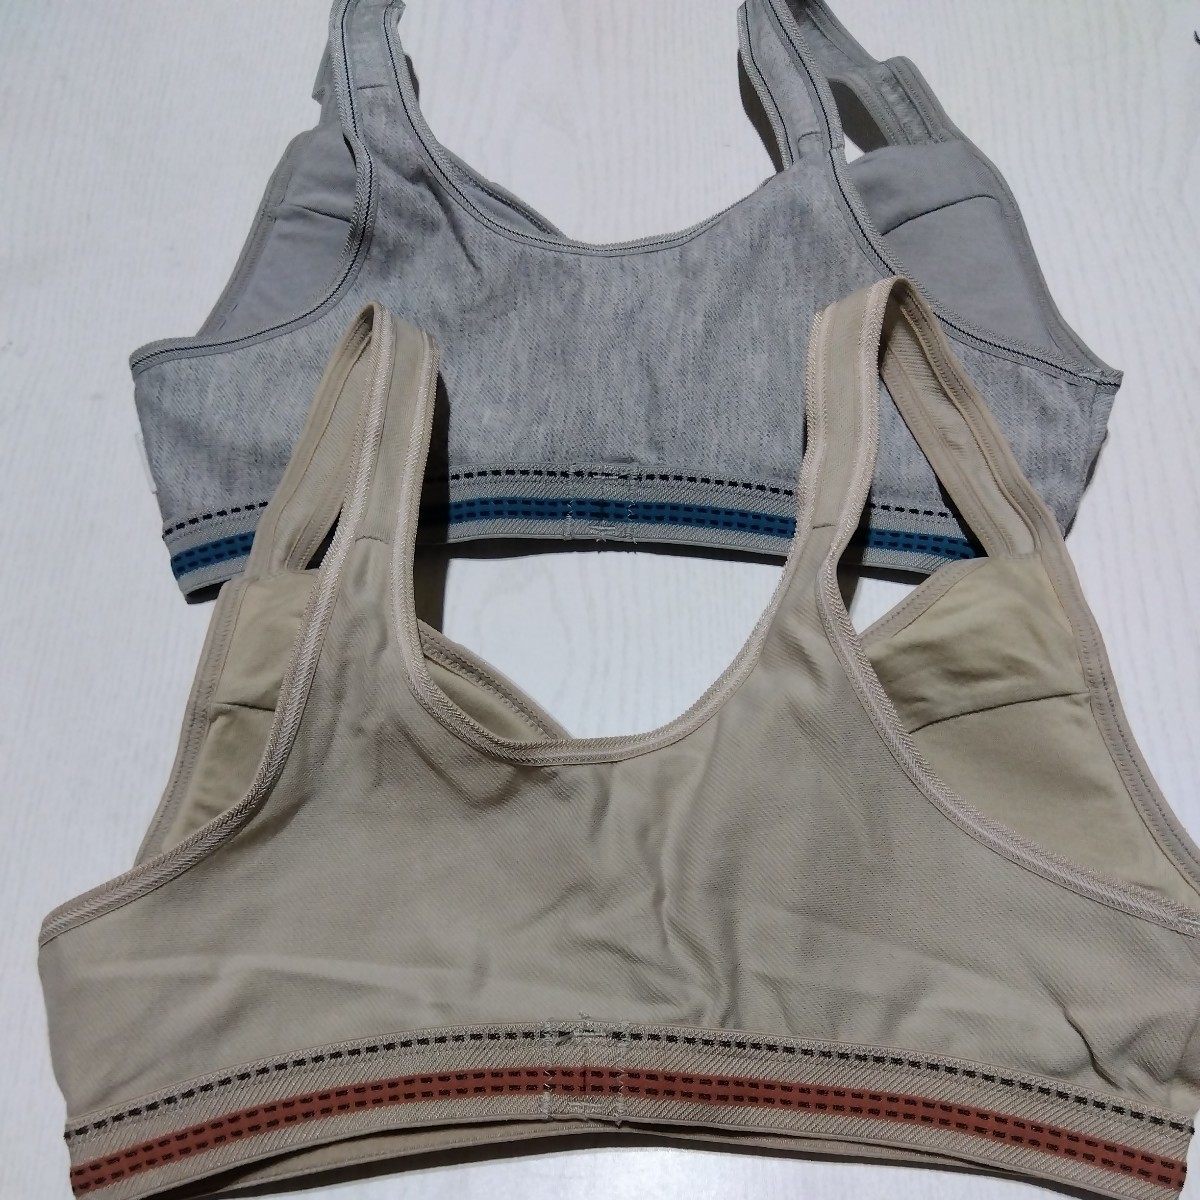  new goods unused tag attaching BVD BODY GEAR sports bra 2 pieces set set sale L size 